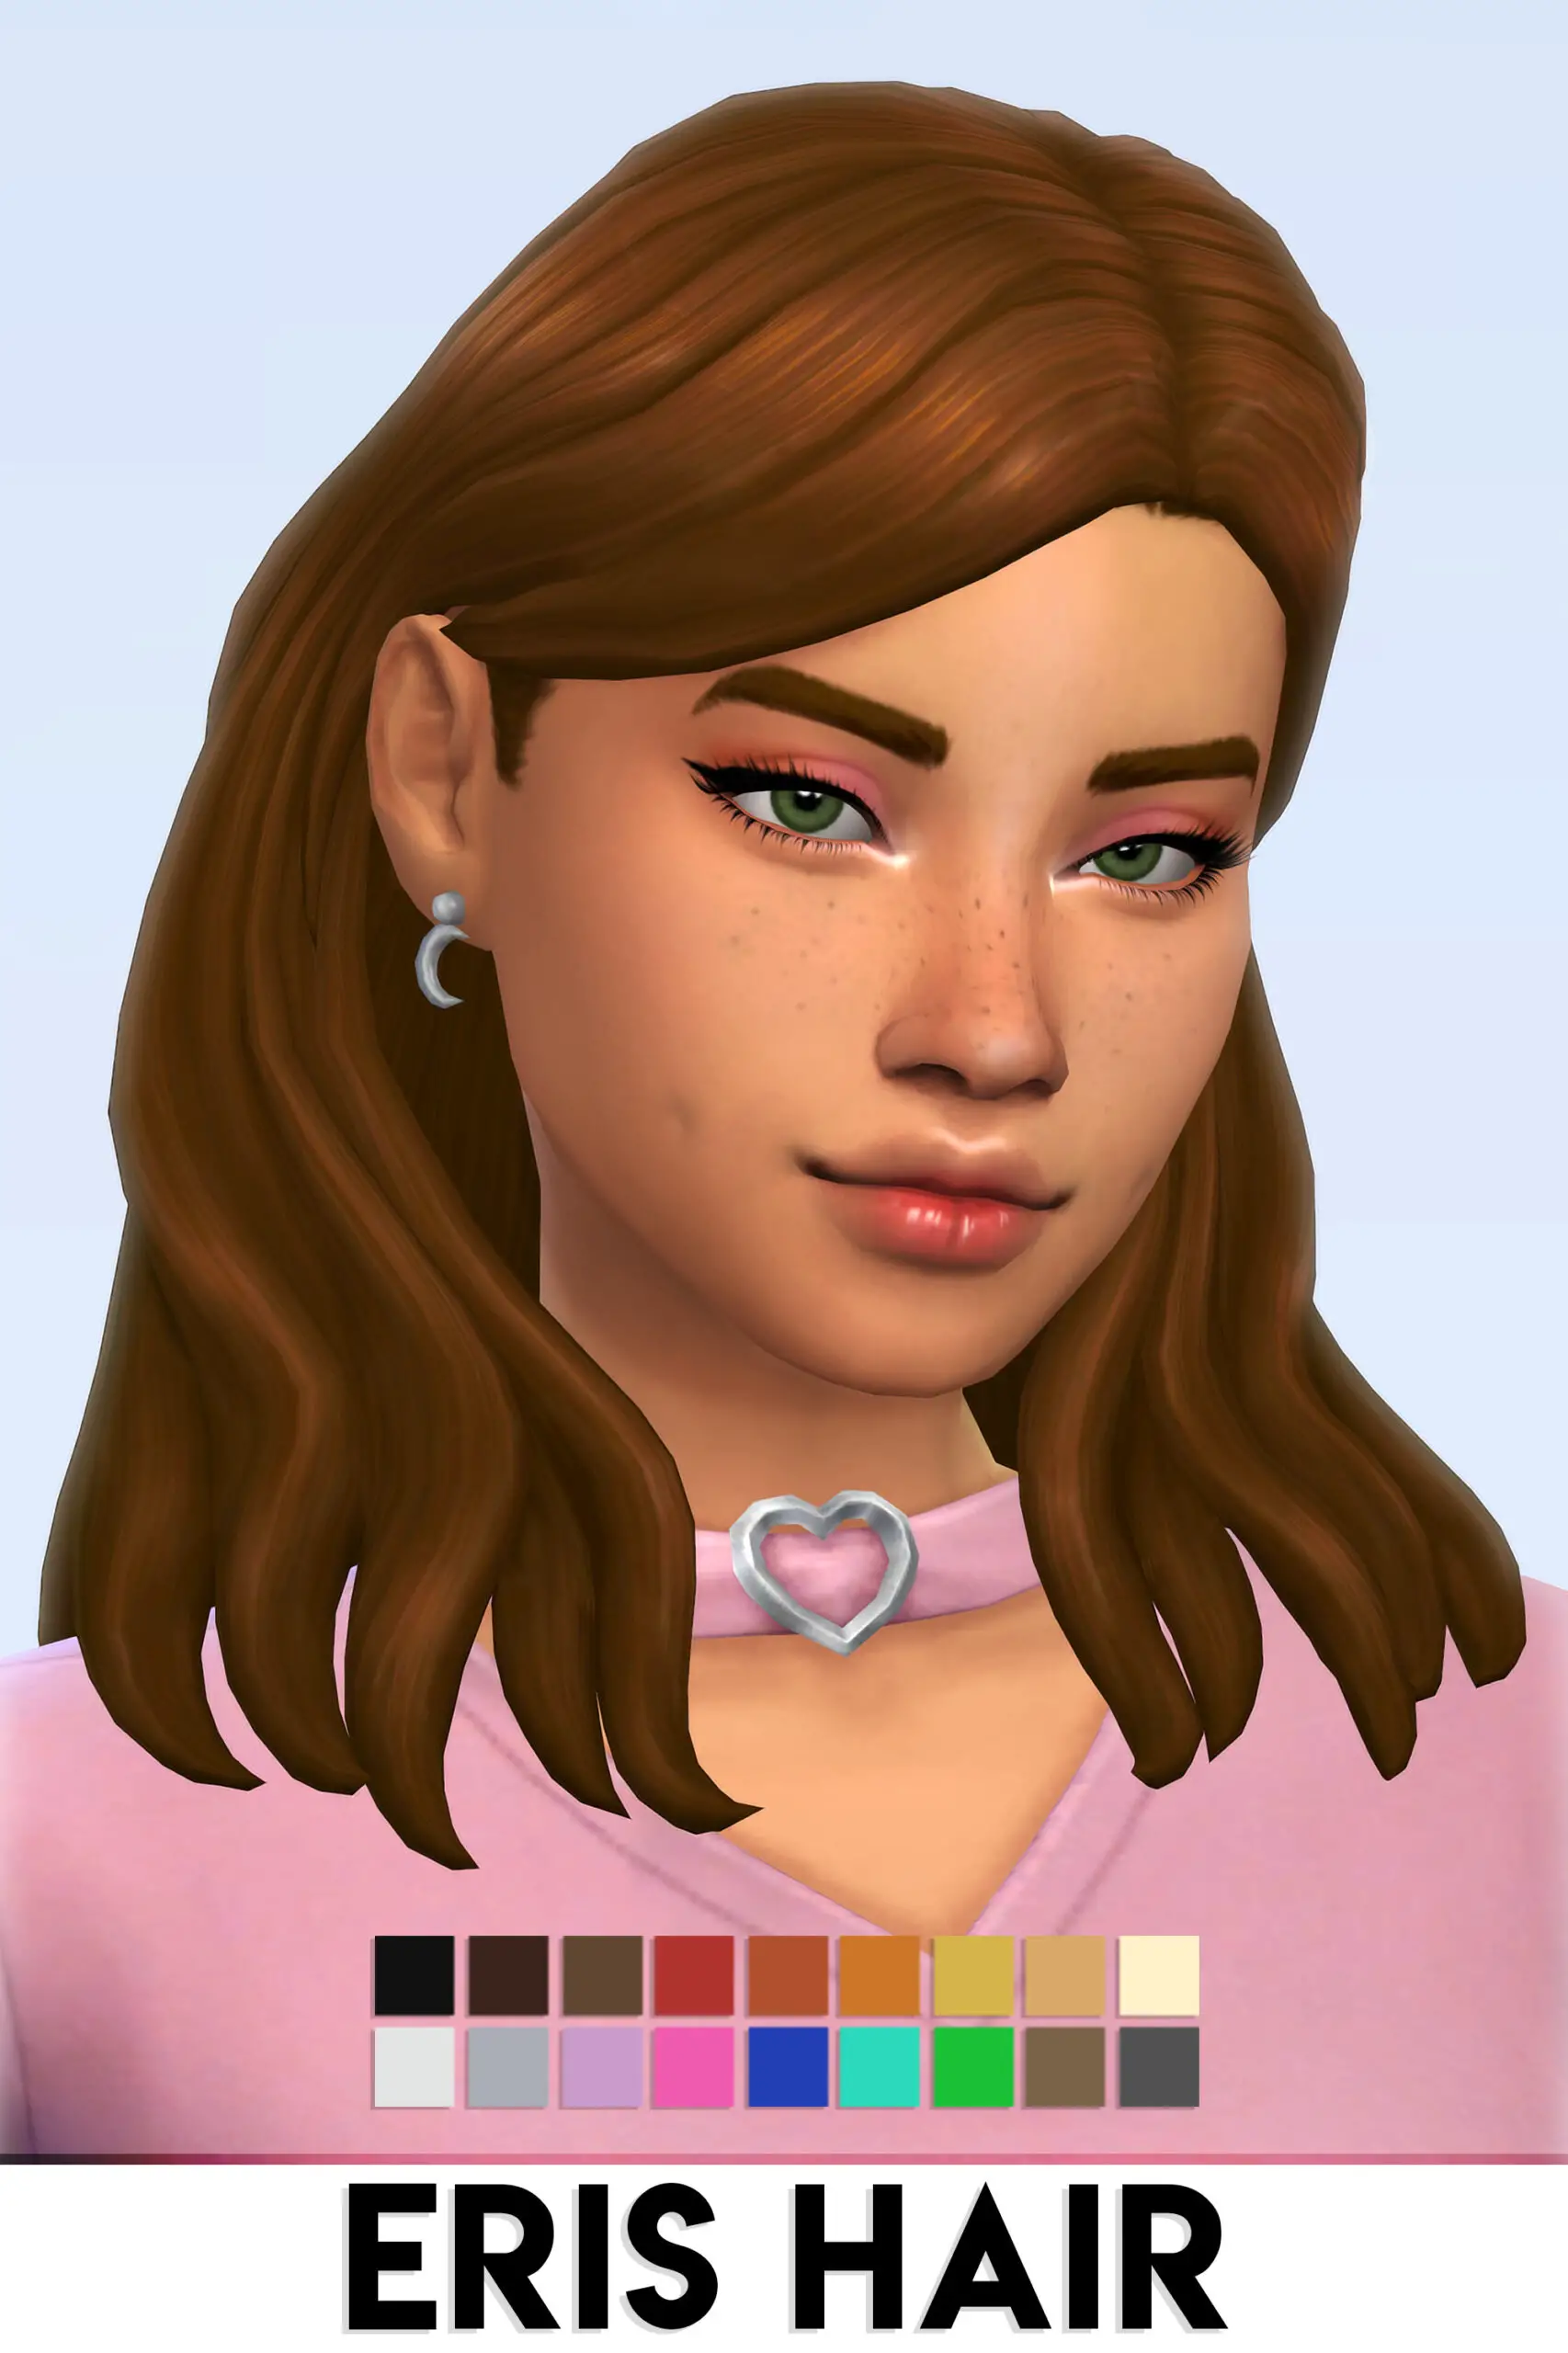 the sims 4 maxis match custom content